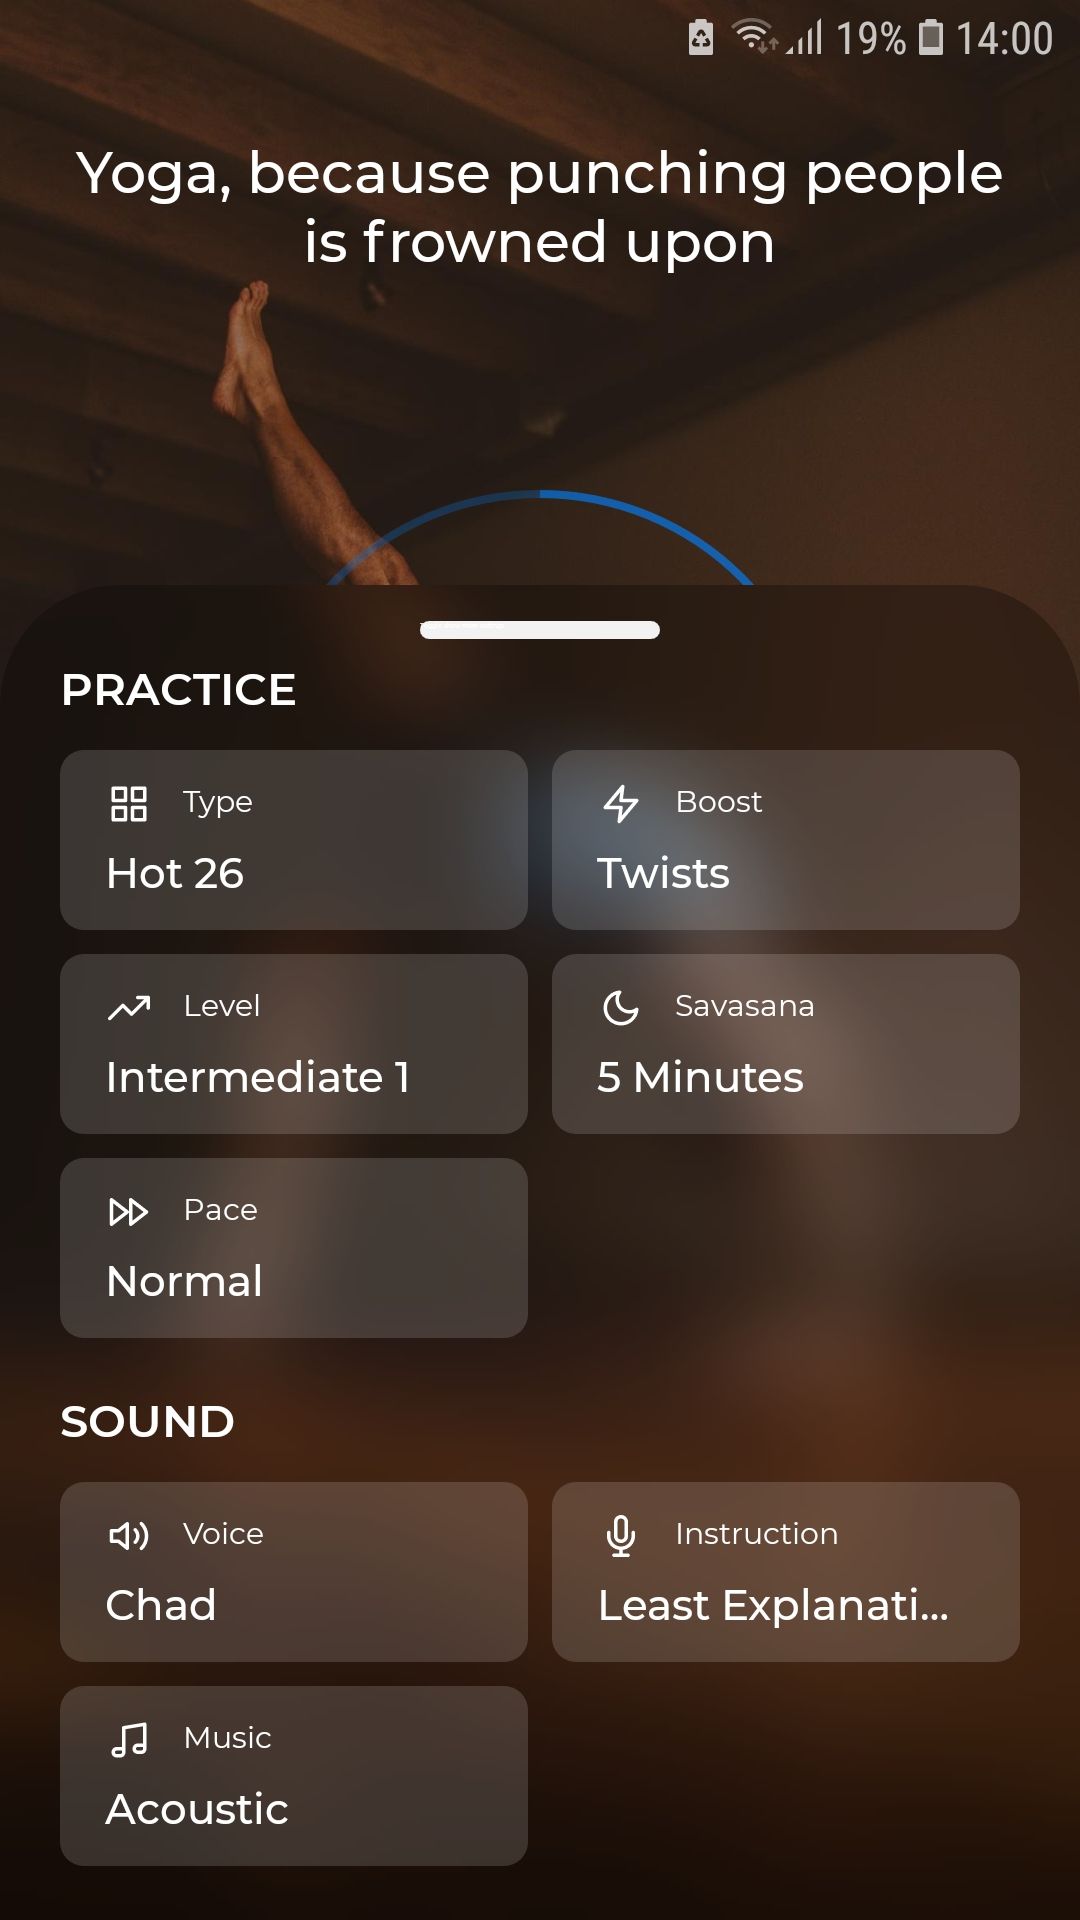 Down Dog Yoga practice mobile workout app